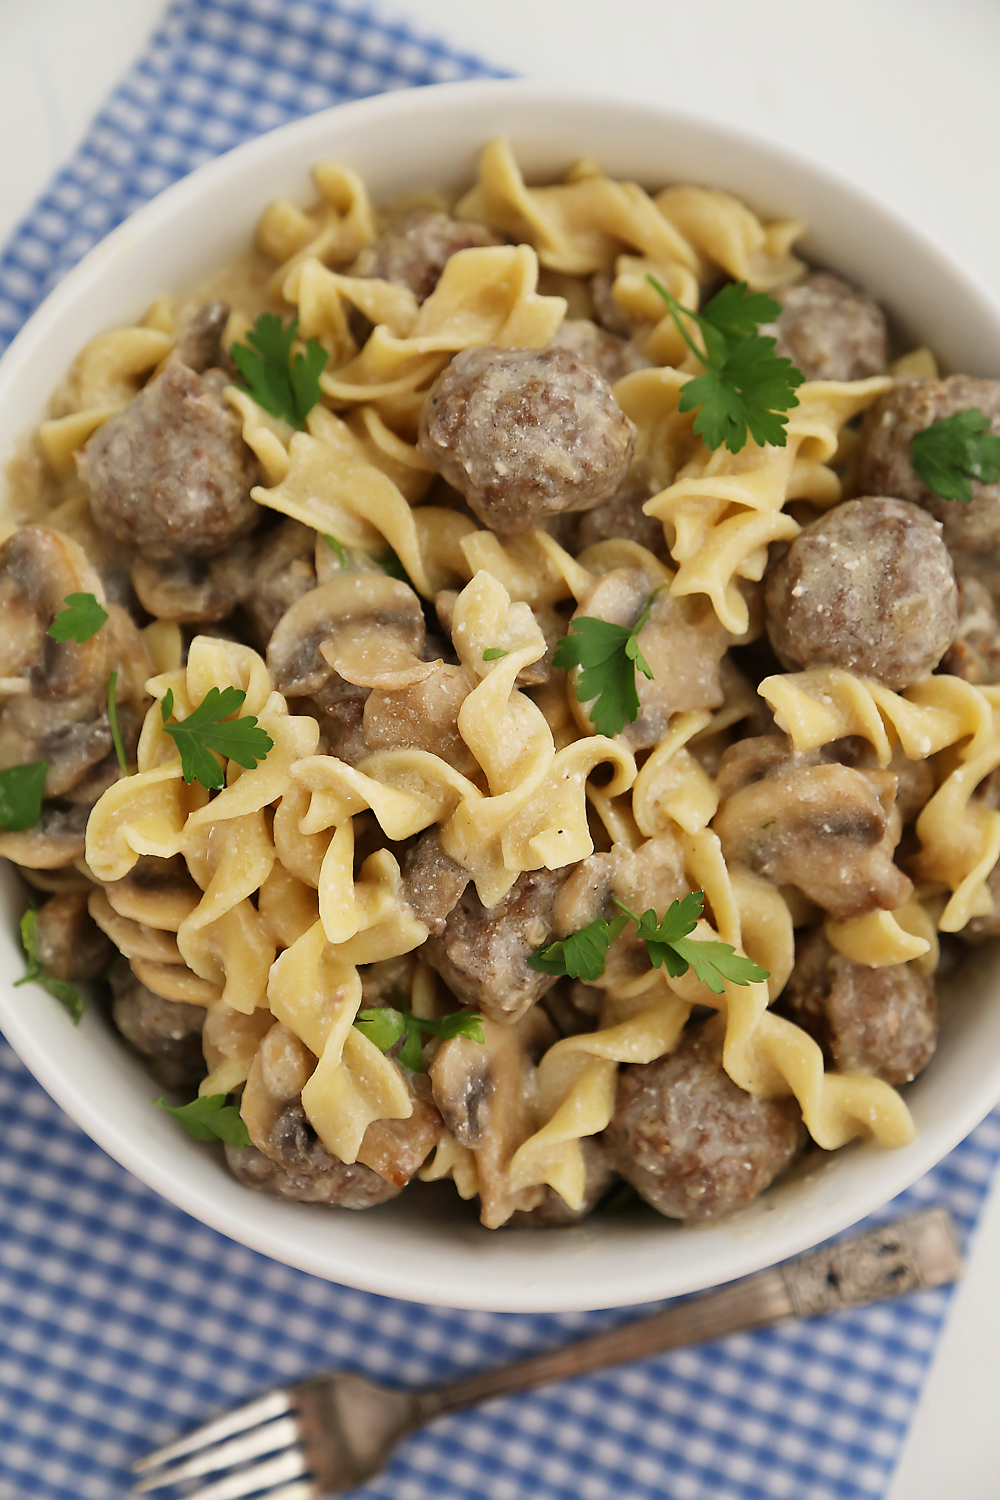 Creamy Mushroom Meatball Stroganoff – Super creamy stroganoff with fresh mushrooms and hearty meatballs, made easily from scratch! Thecomfortofcooking.com